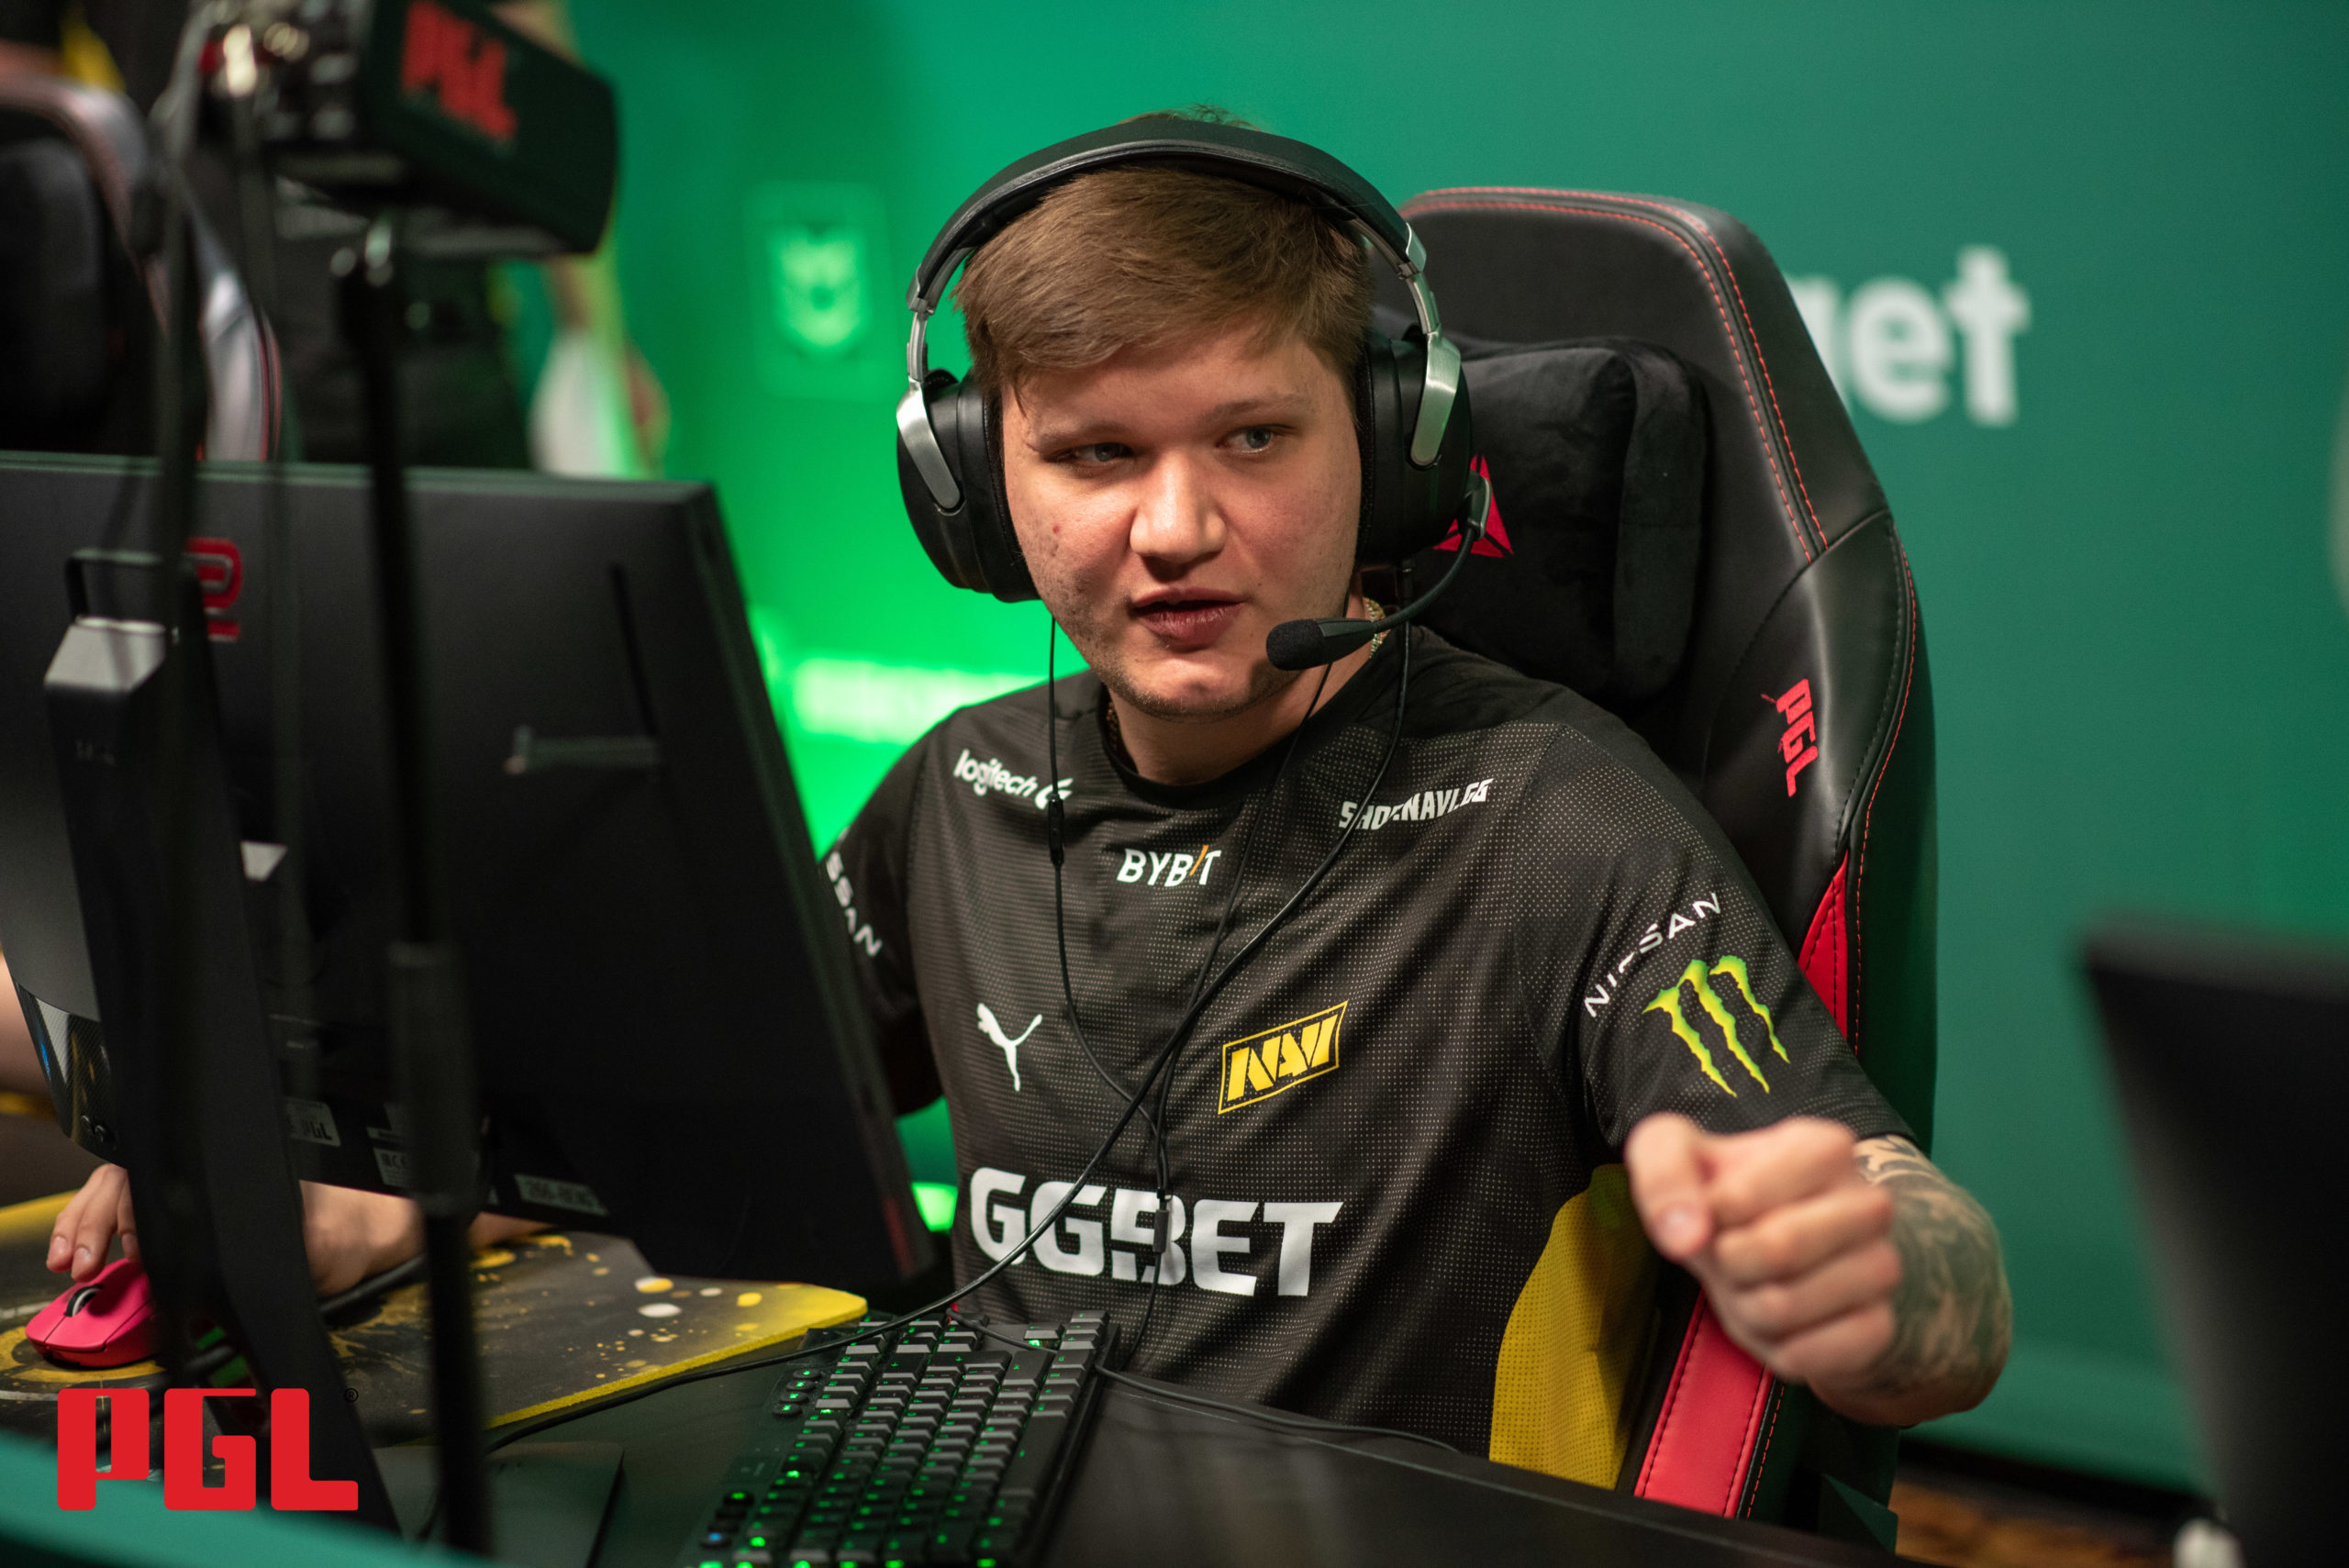 s1mple shared his impressions of the tournament final